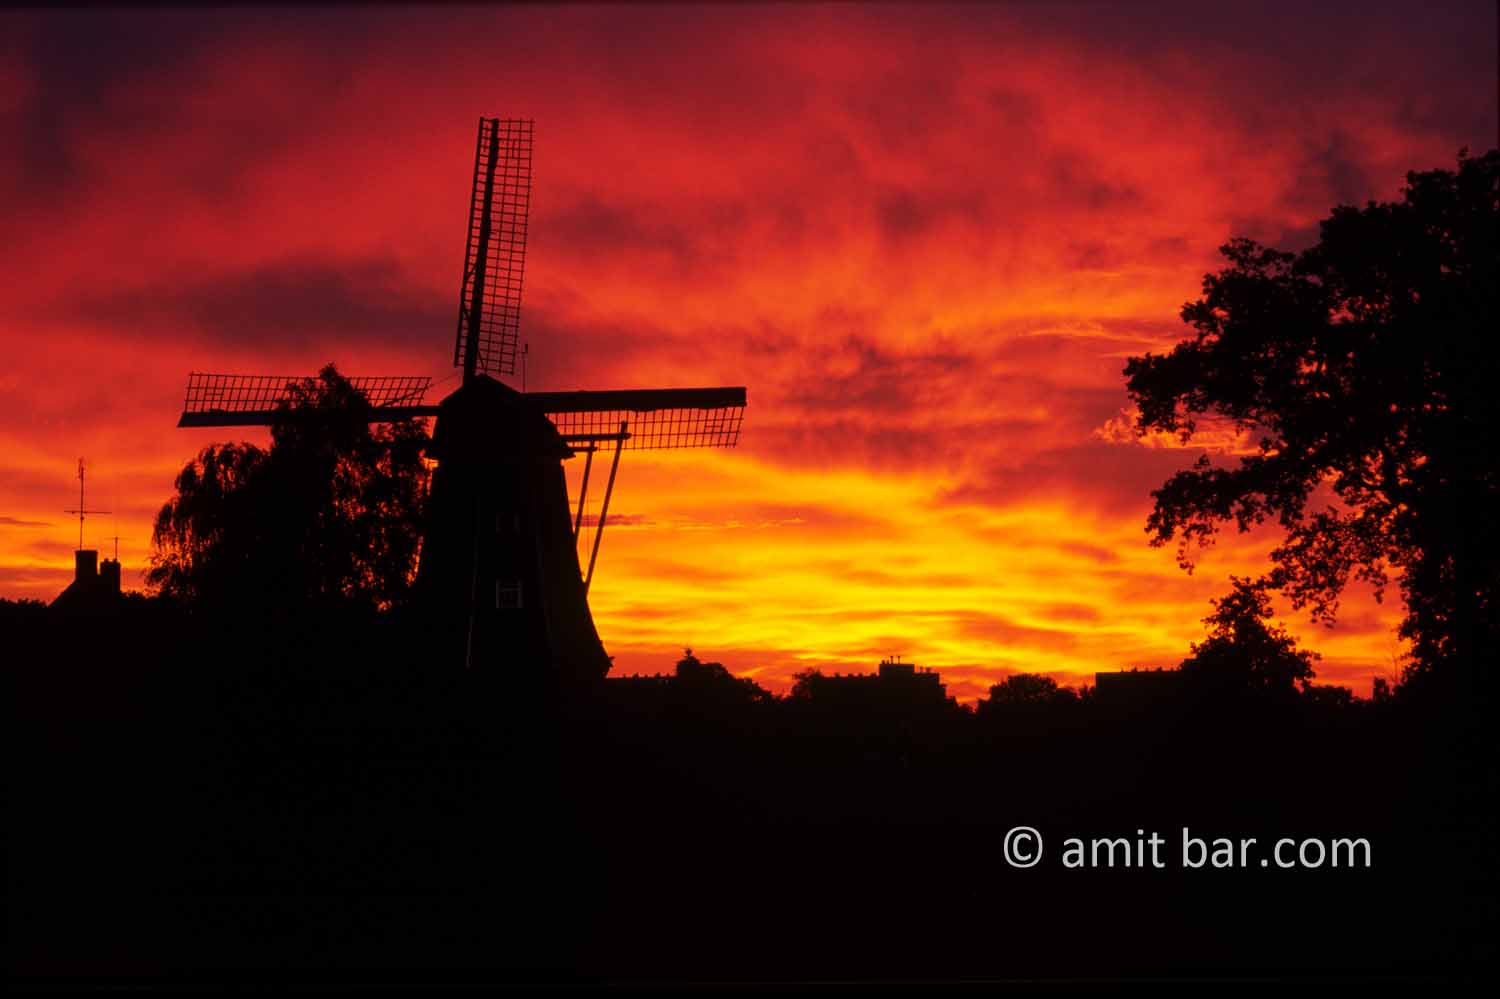 Windmill at sunset I: Windmill at sunset in Doetinchem, The Netherands